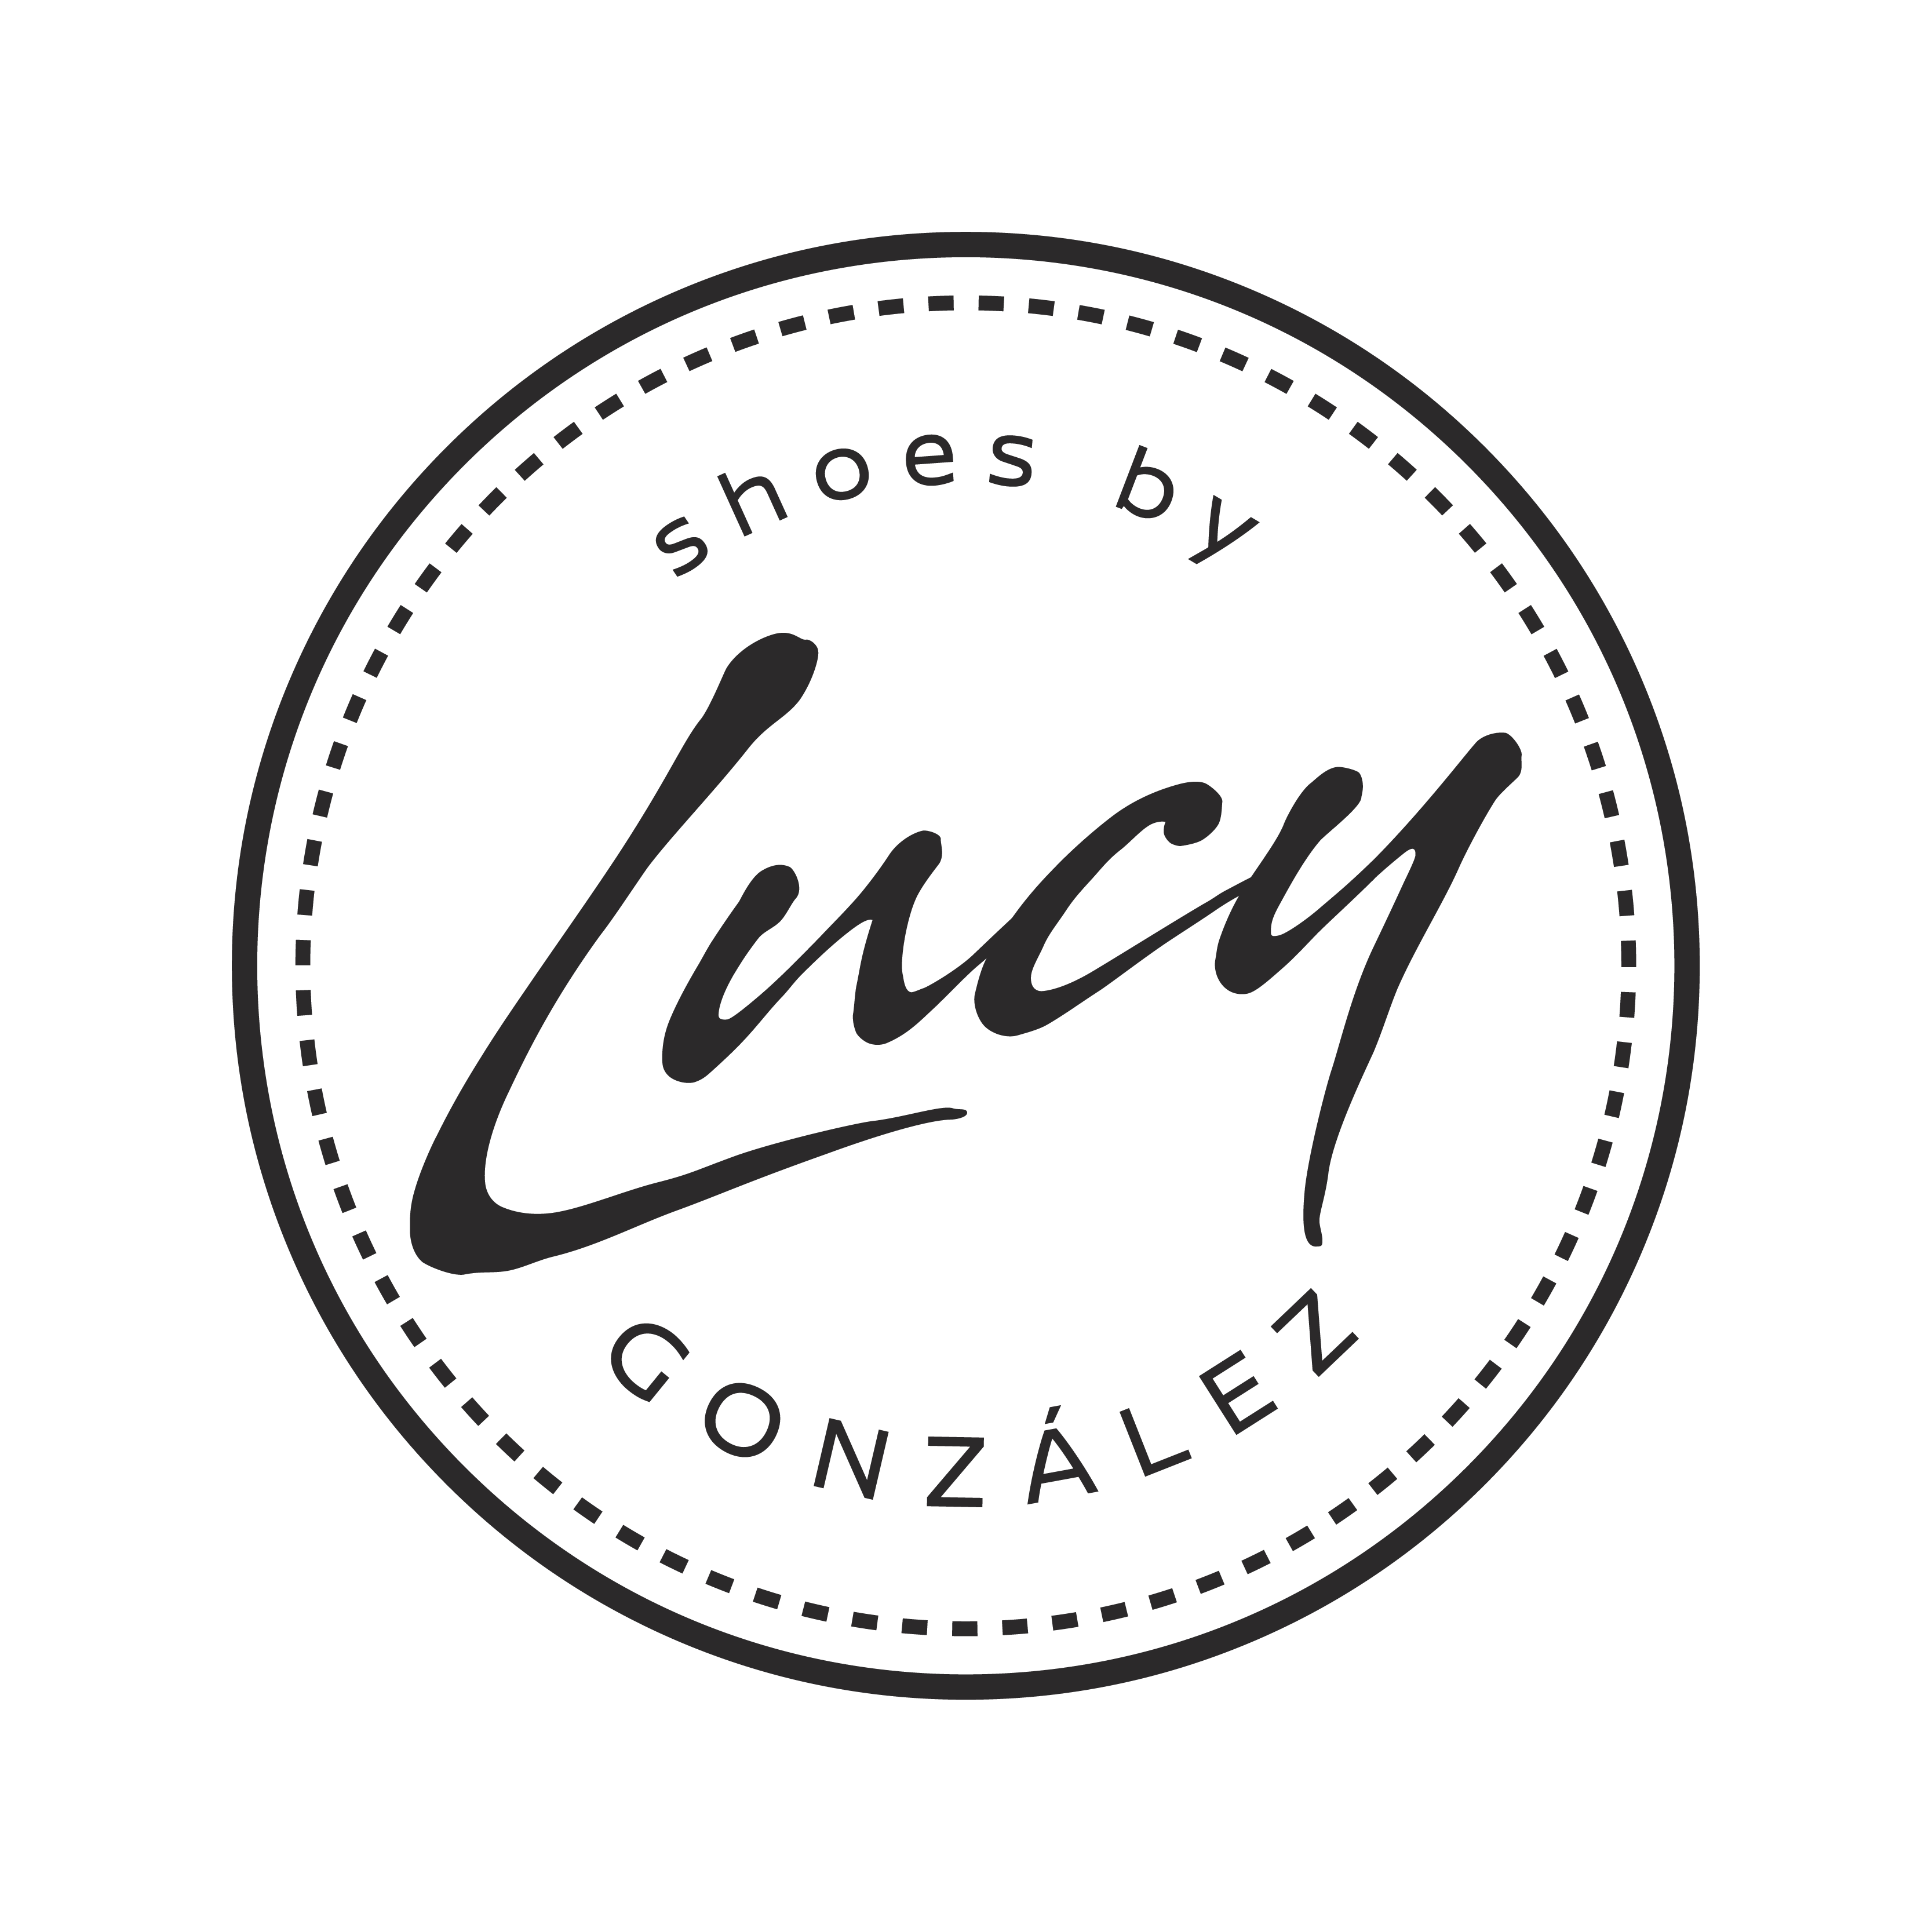 Lucy Shoess